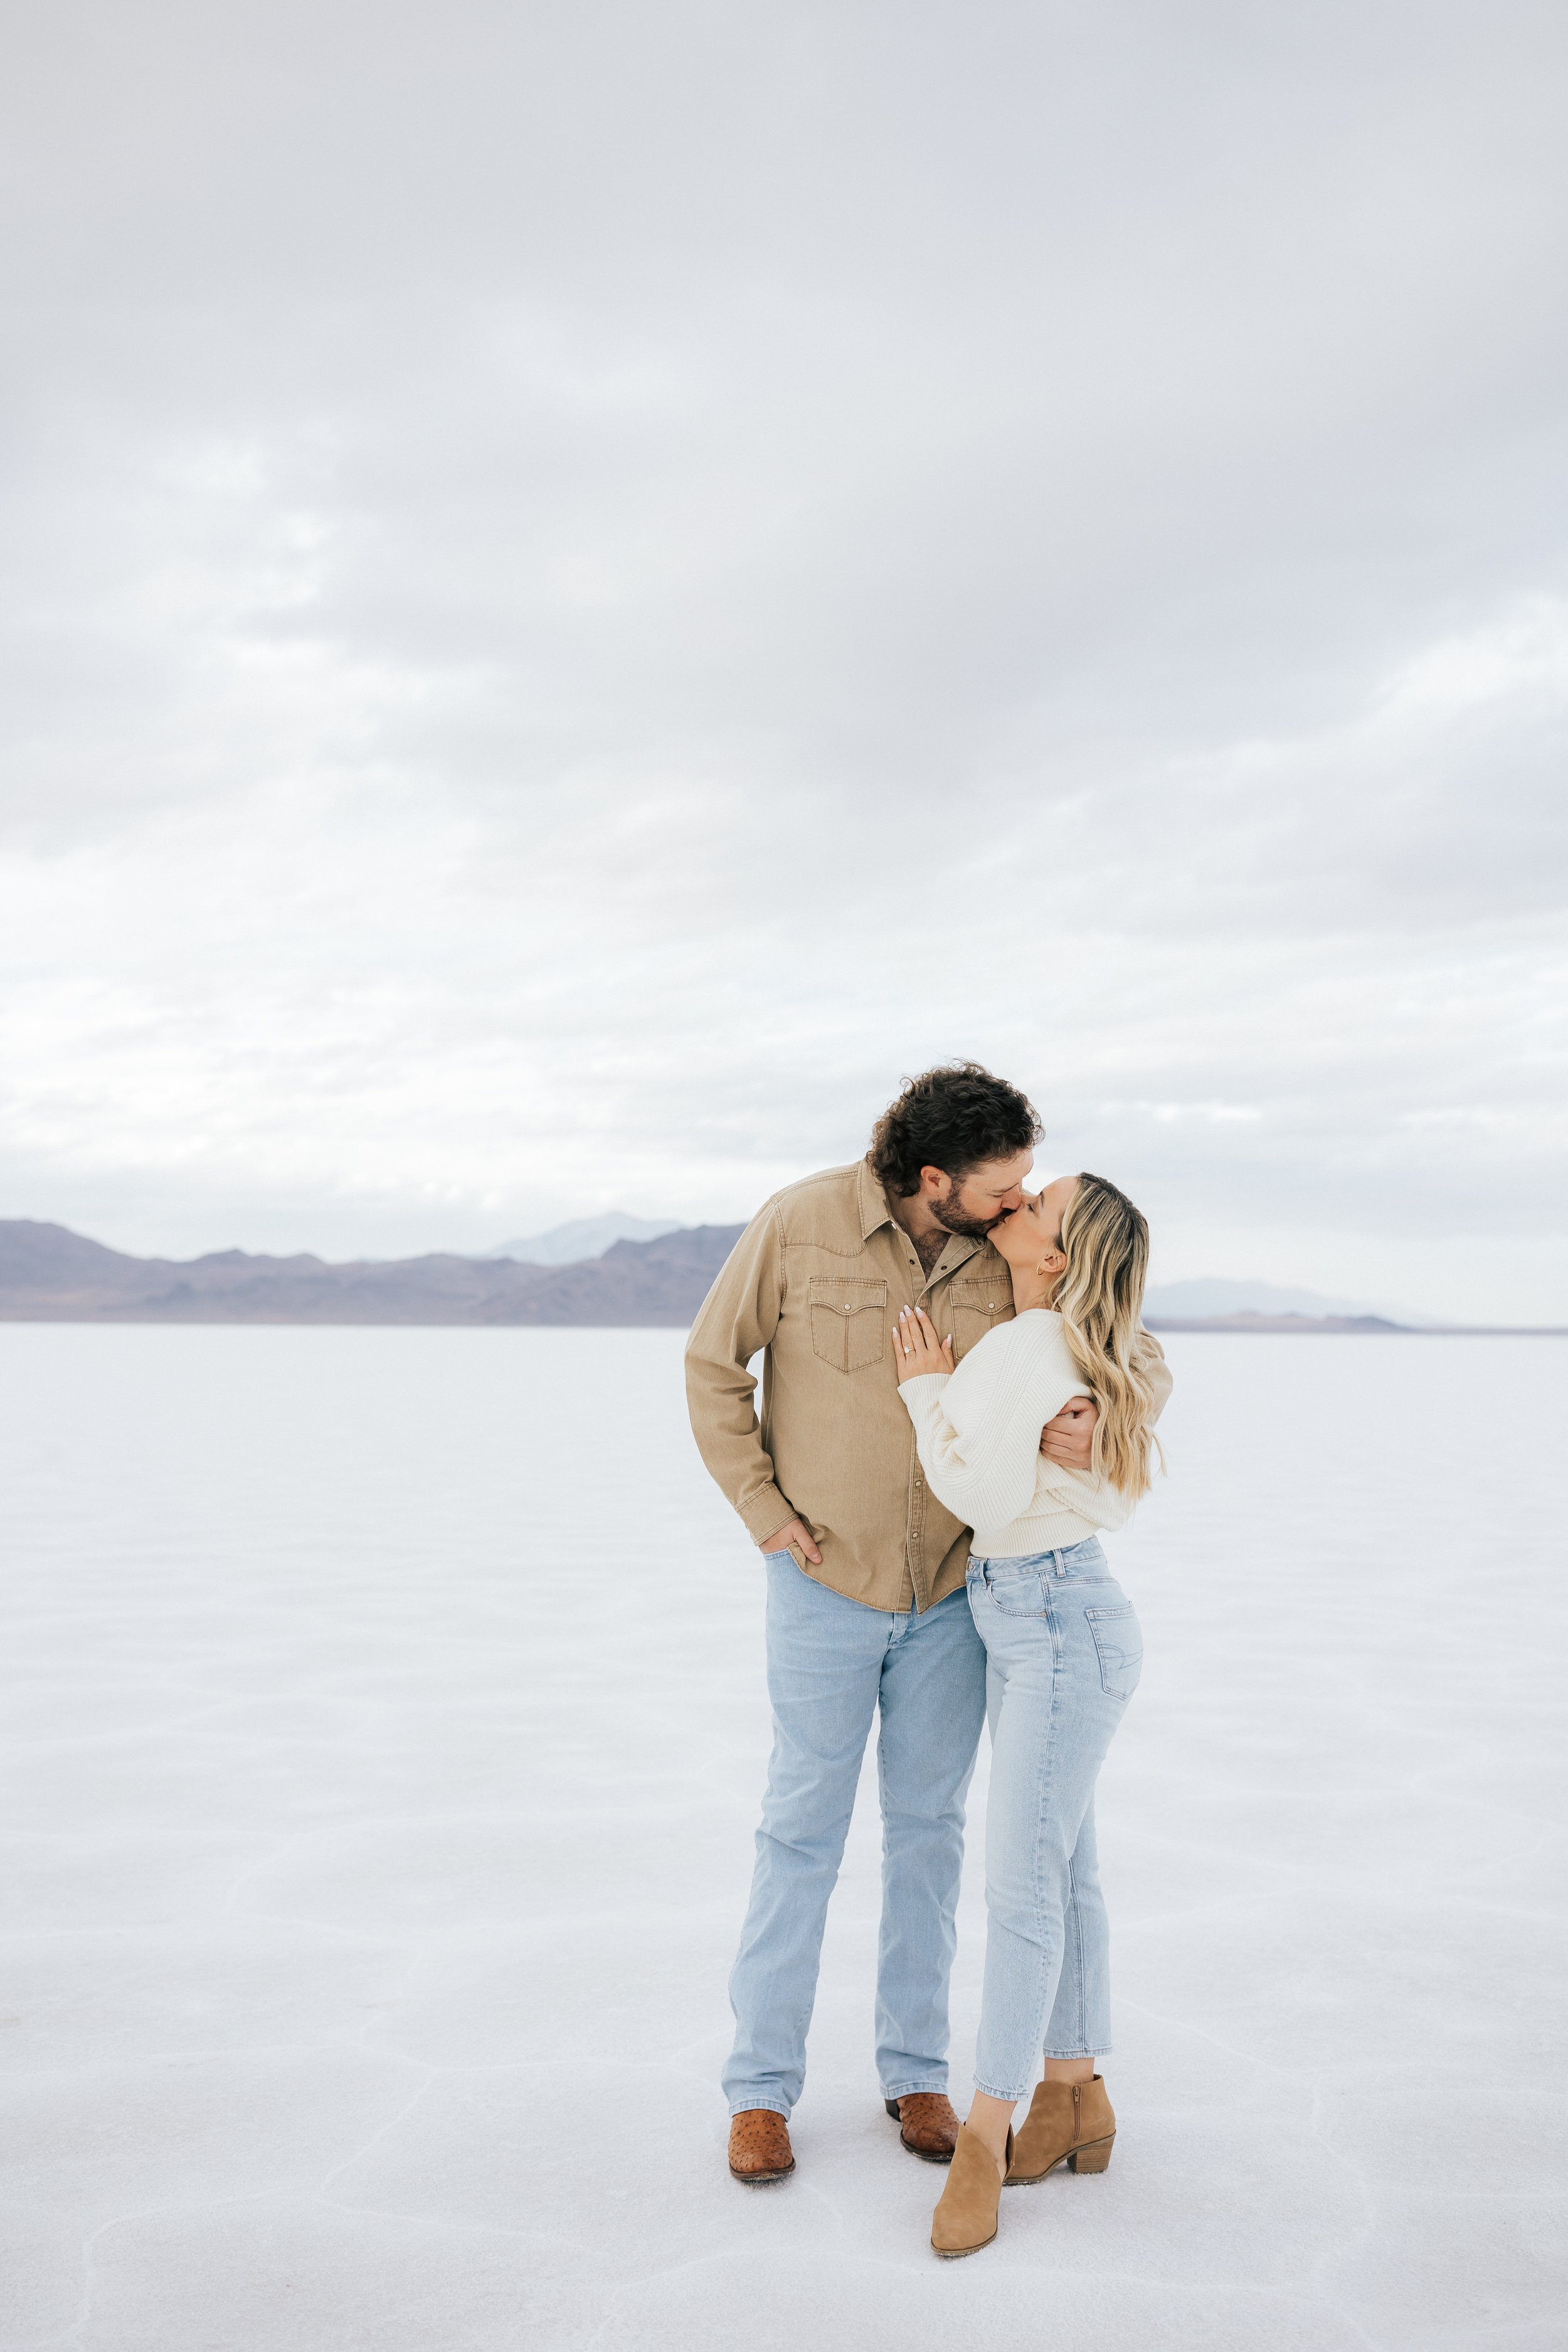  An engaged couple kisses at the Bonneville Salt Flats near Wendover, Nevada and Salt Lake City, Utah. The salt flats are overcast and white with cracks and mountains behind them. The girl wears a white sweater with jeans and the man wears a tan butt